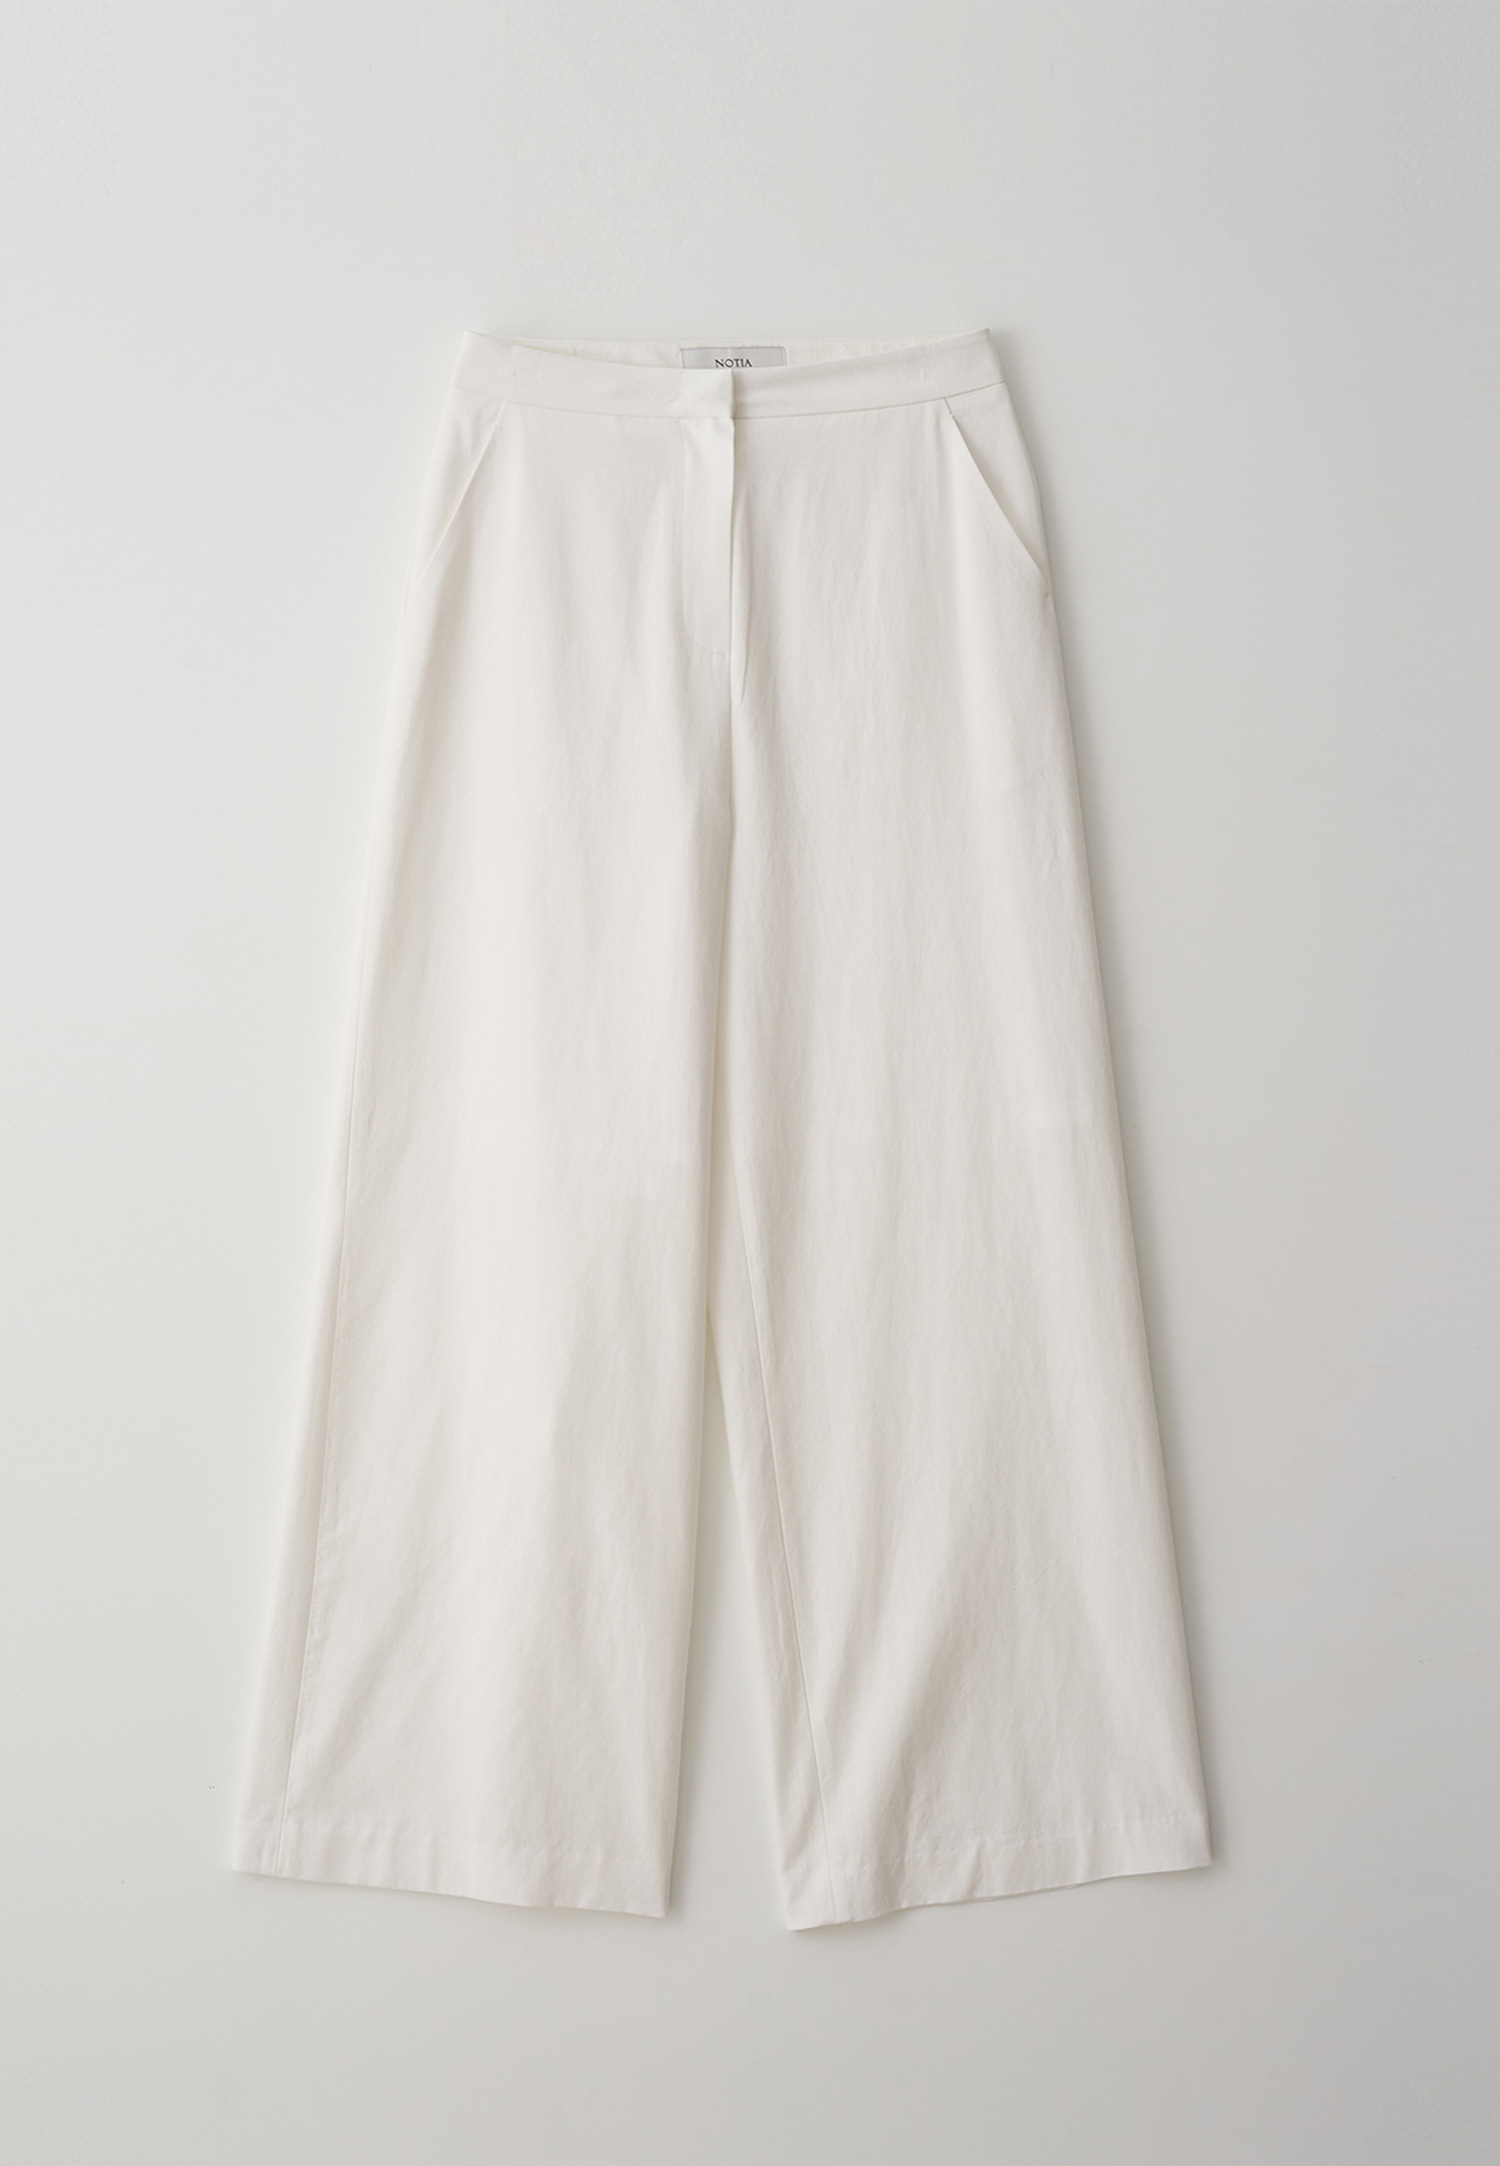 RELAXED FIT COTTON PANTS - IVORY